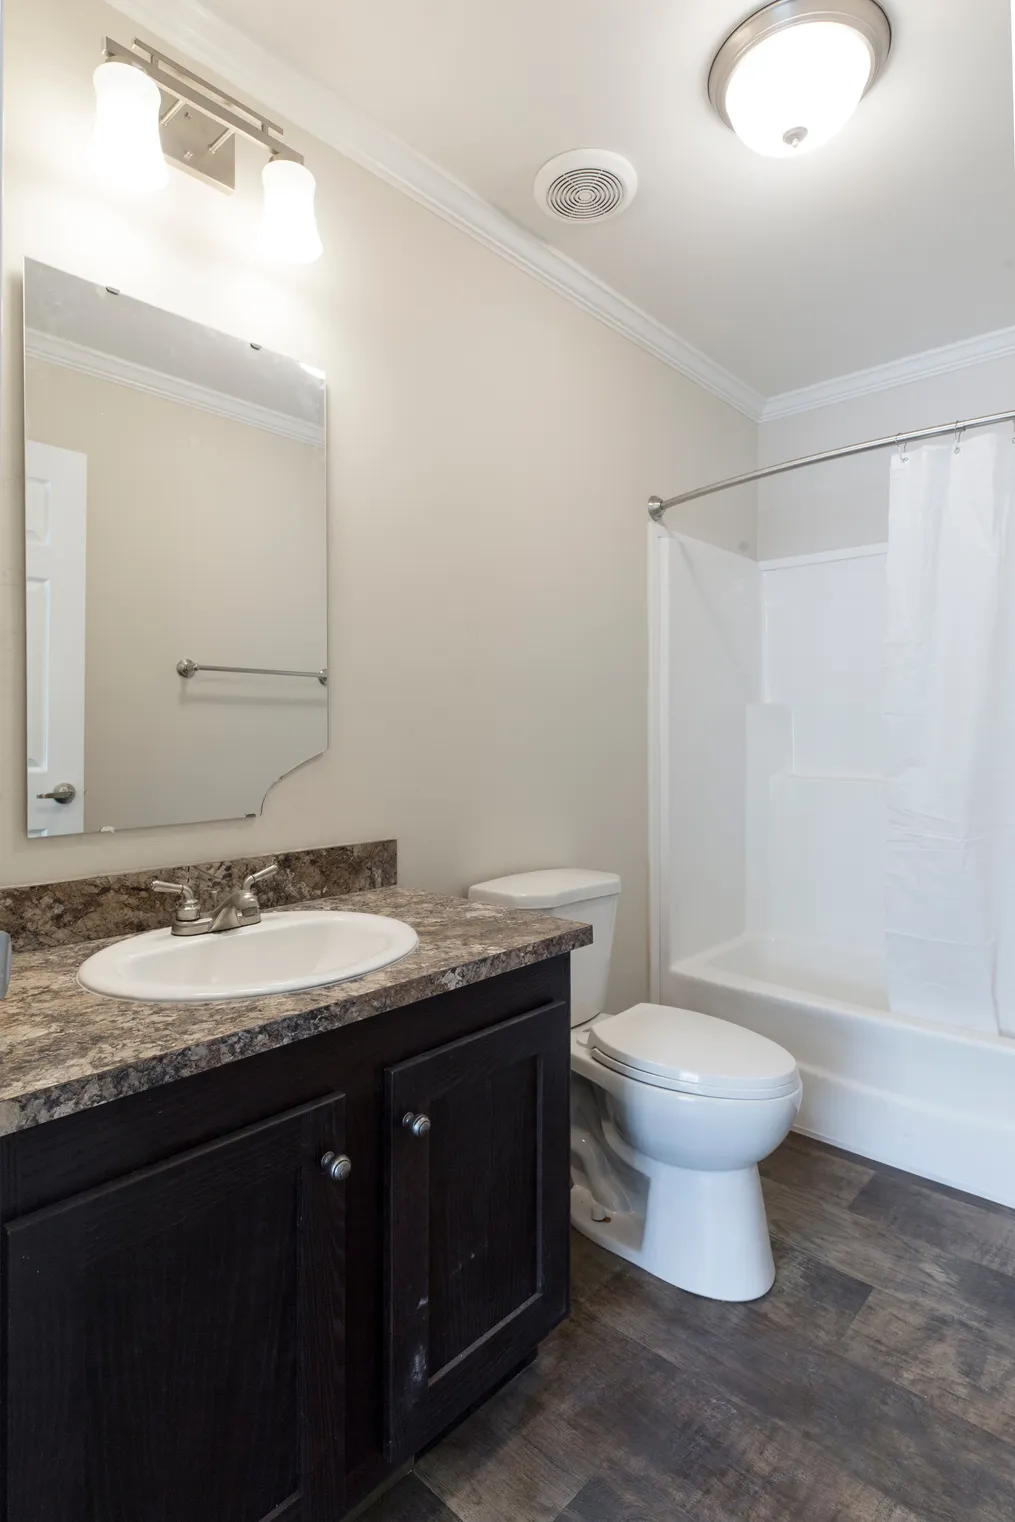 The 2089 52X28 3+2 HERITAGE Guest Bathroom. This Manufactured Mobile Home features 3 bedrooms and 2 baths.